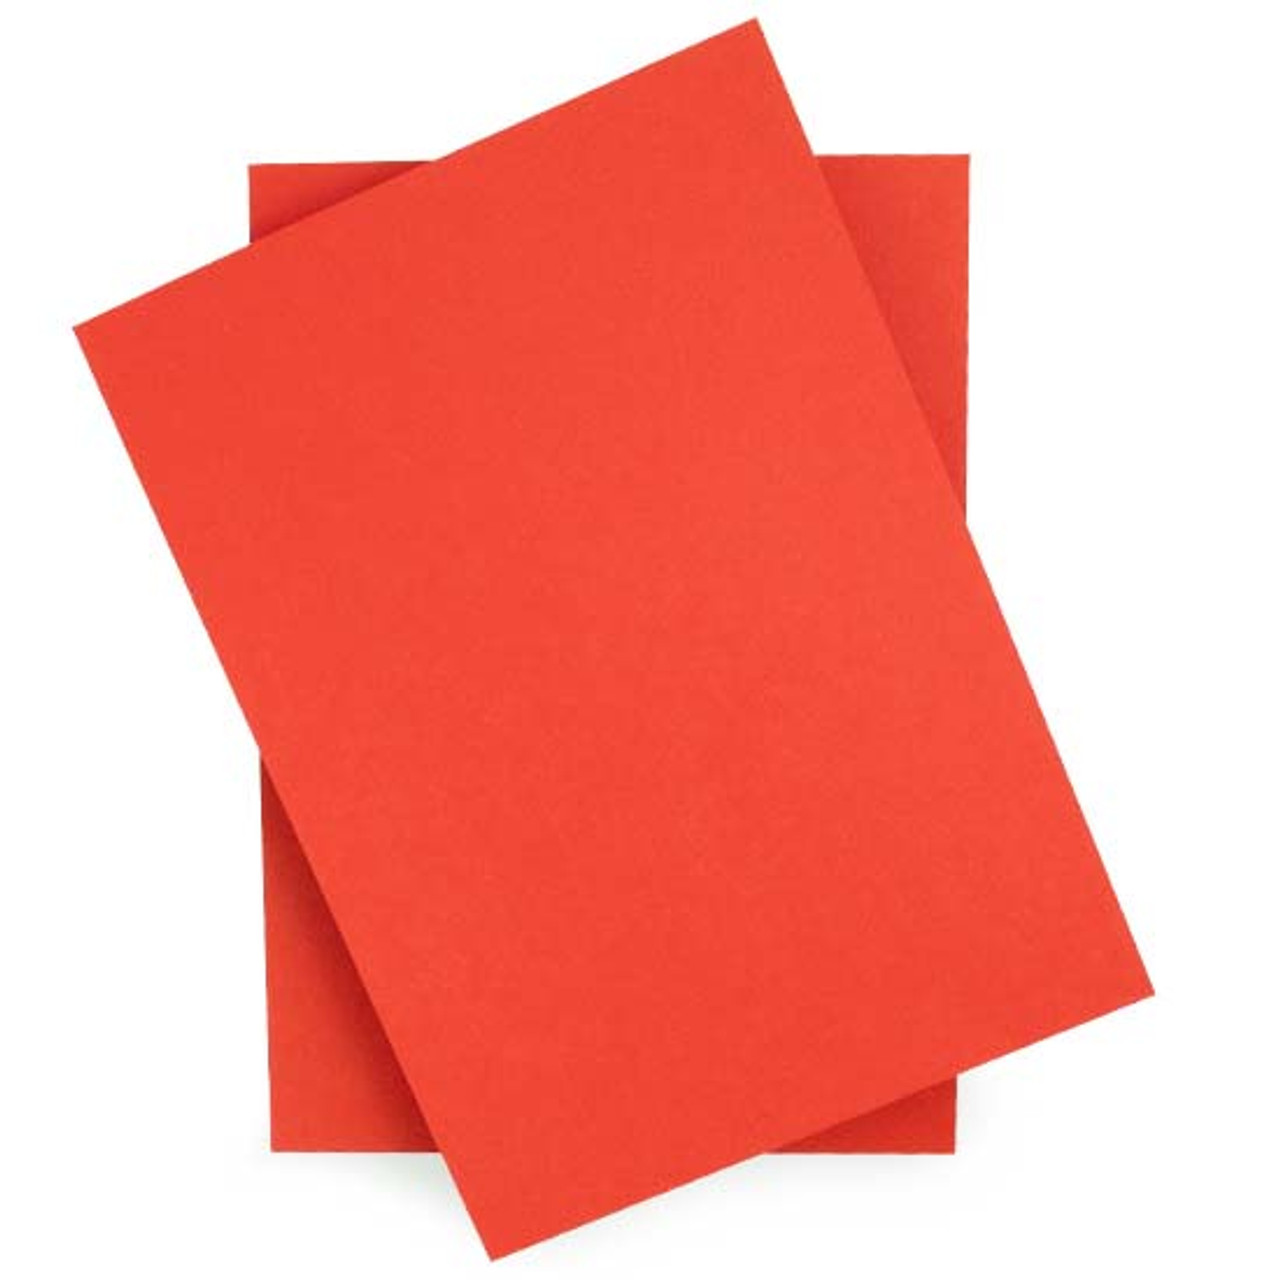 Red A4 Sheet | Poppy Red | Paper | 297mm x 210mm